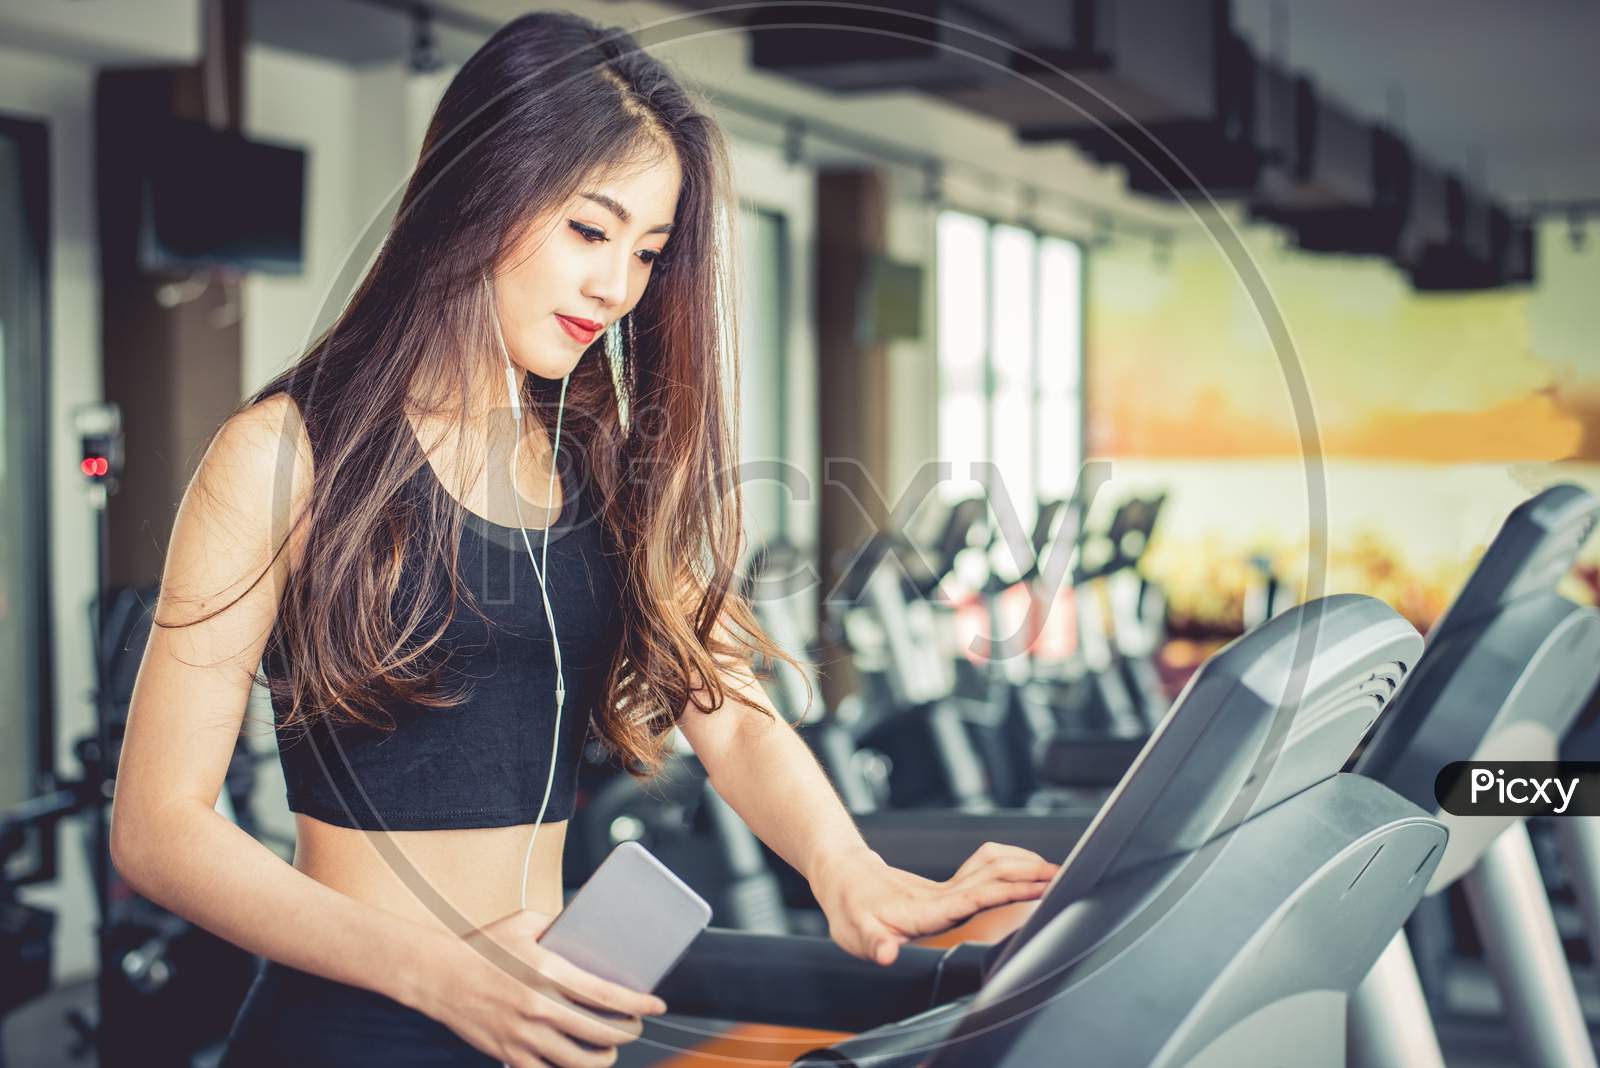 Asian Woman Using Smart Phone When Workout Or Strength Training At Fitness Gym On Treadmill. Relax And Technology Concept. Sports Exercise And Health Care Theme. Happy And Comfortable Mood.